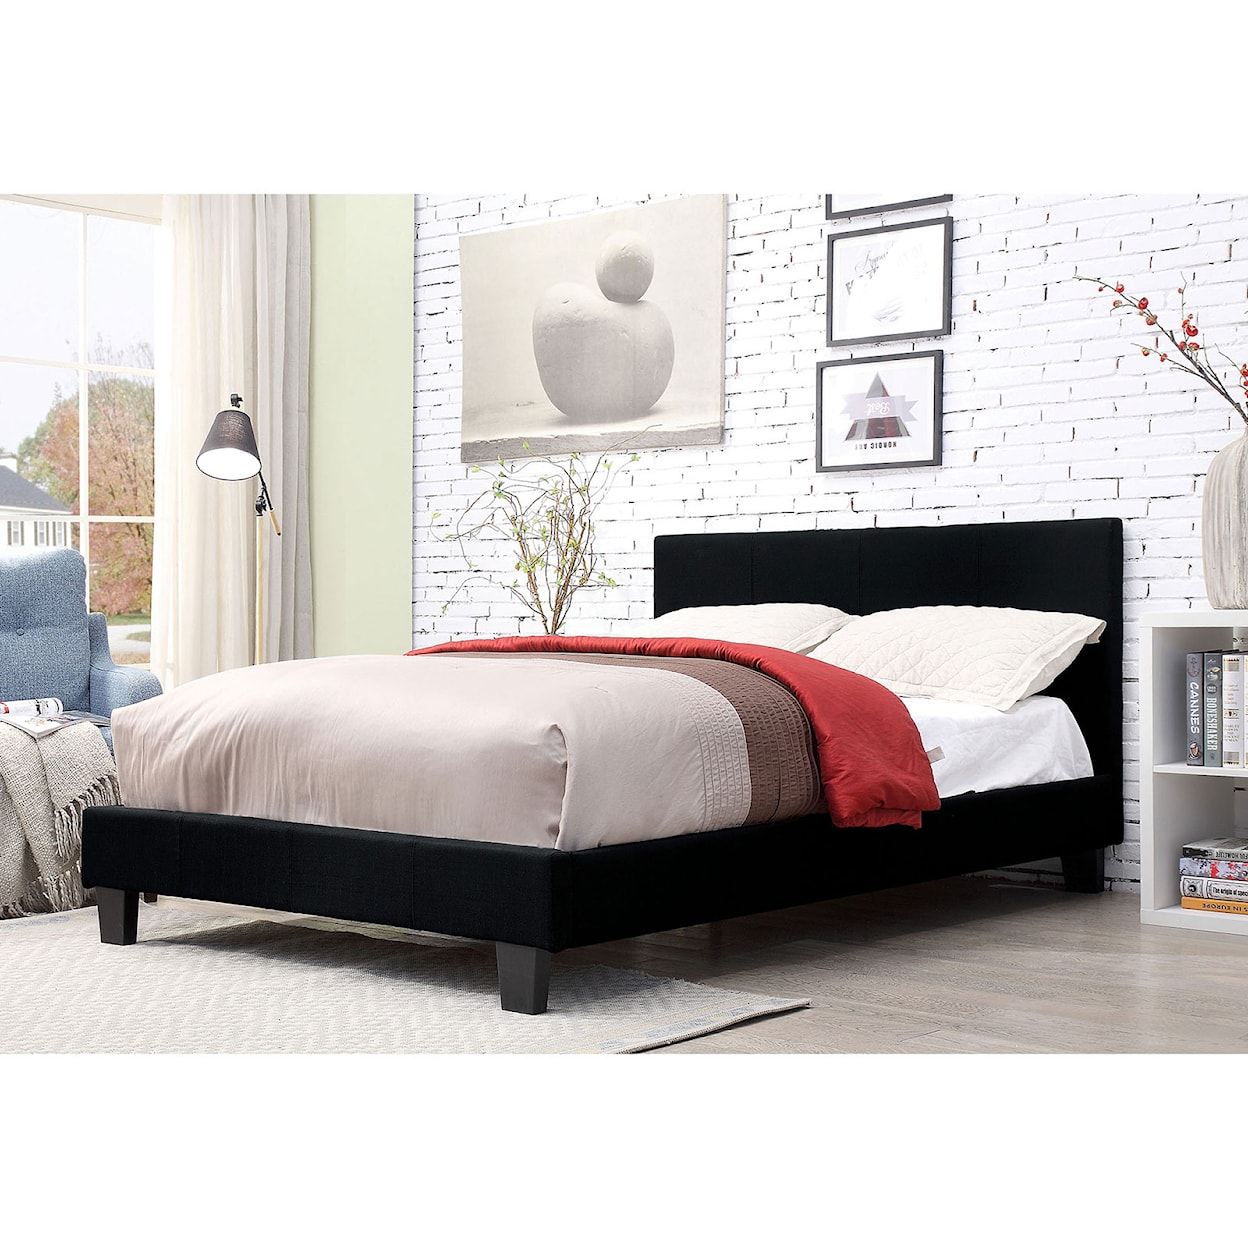 Furniture of America Sims Queen Bed